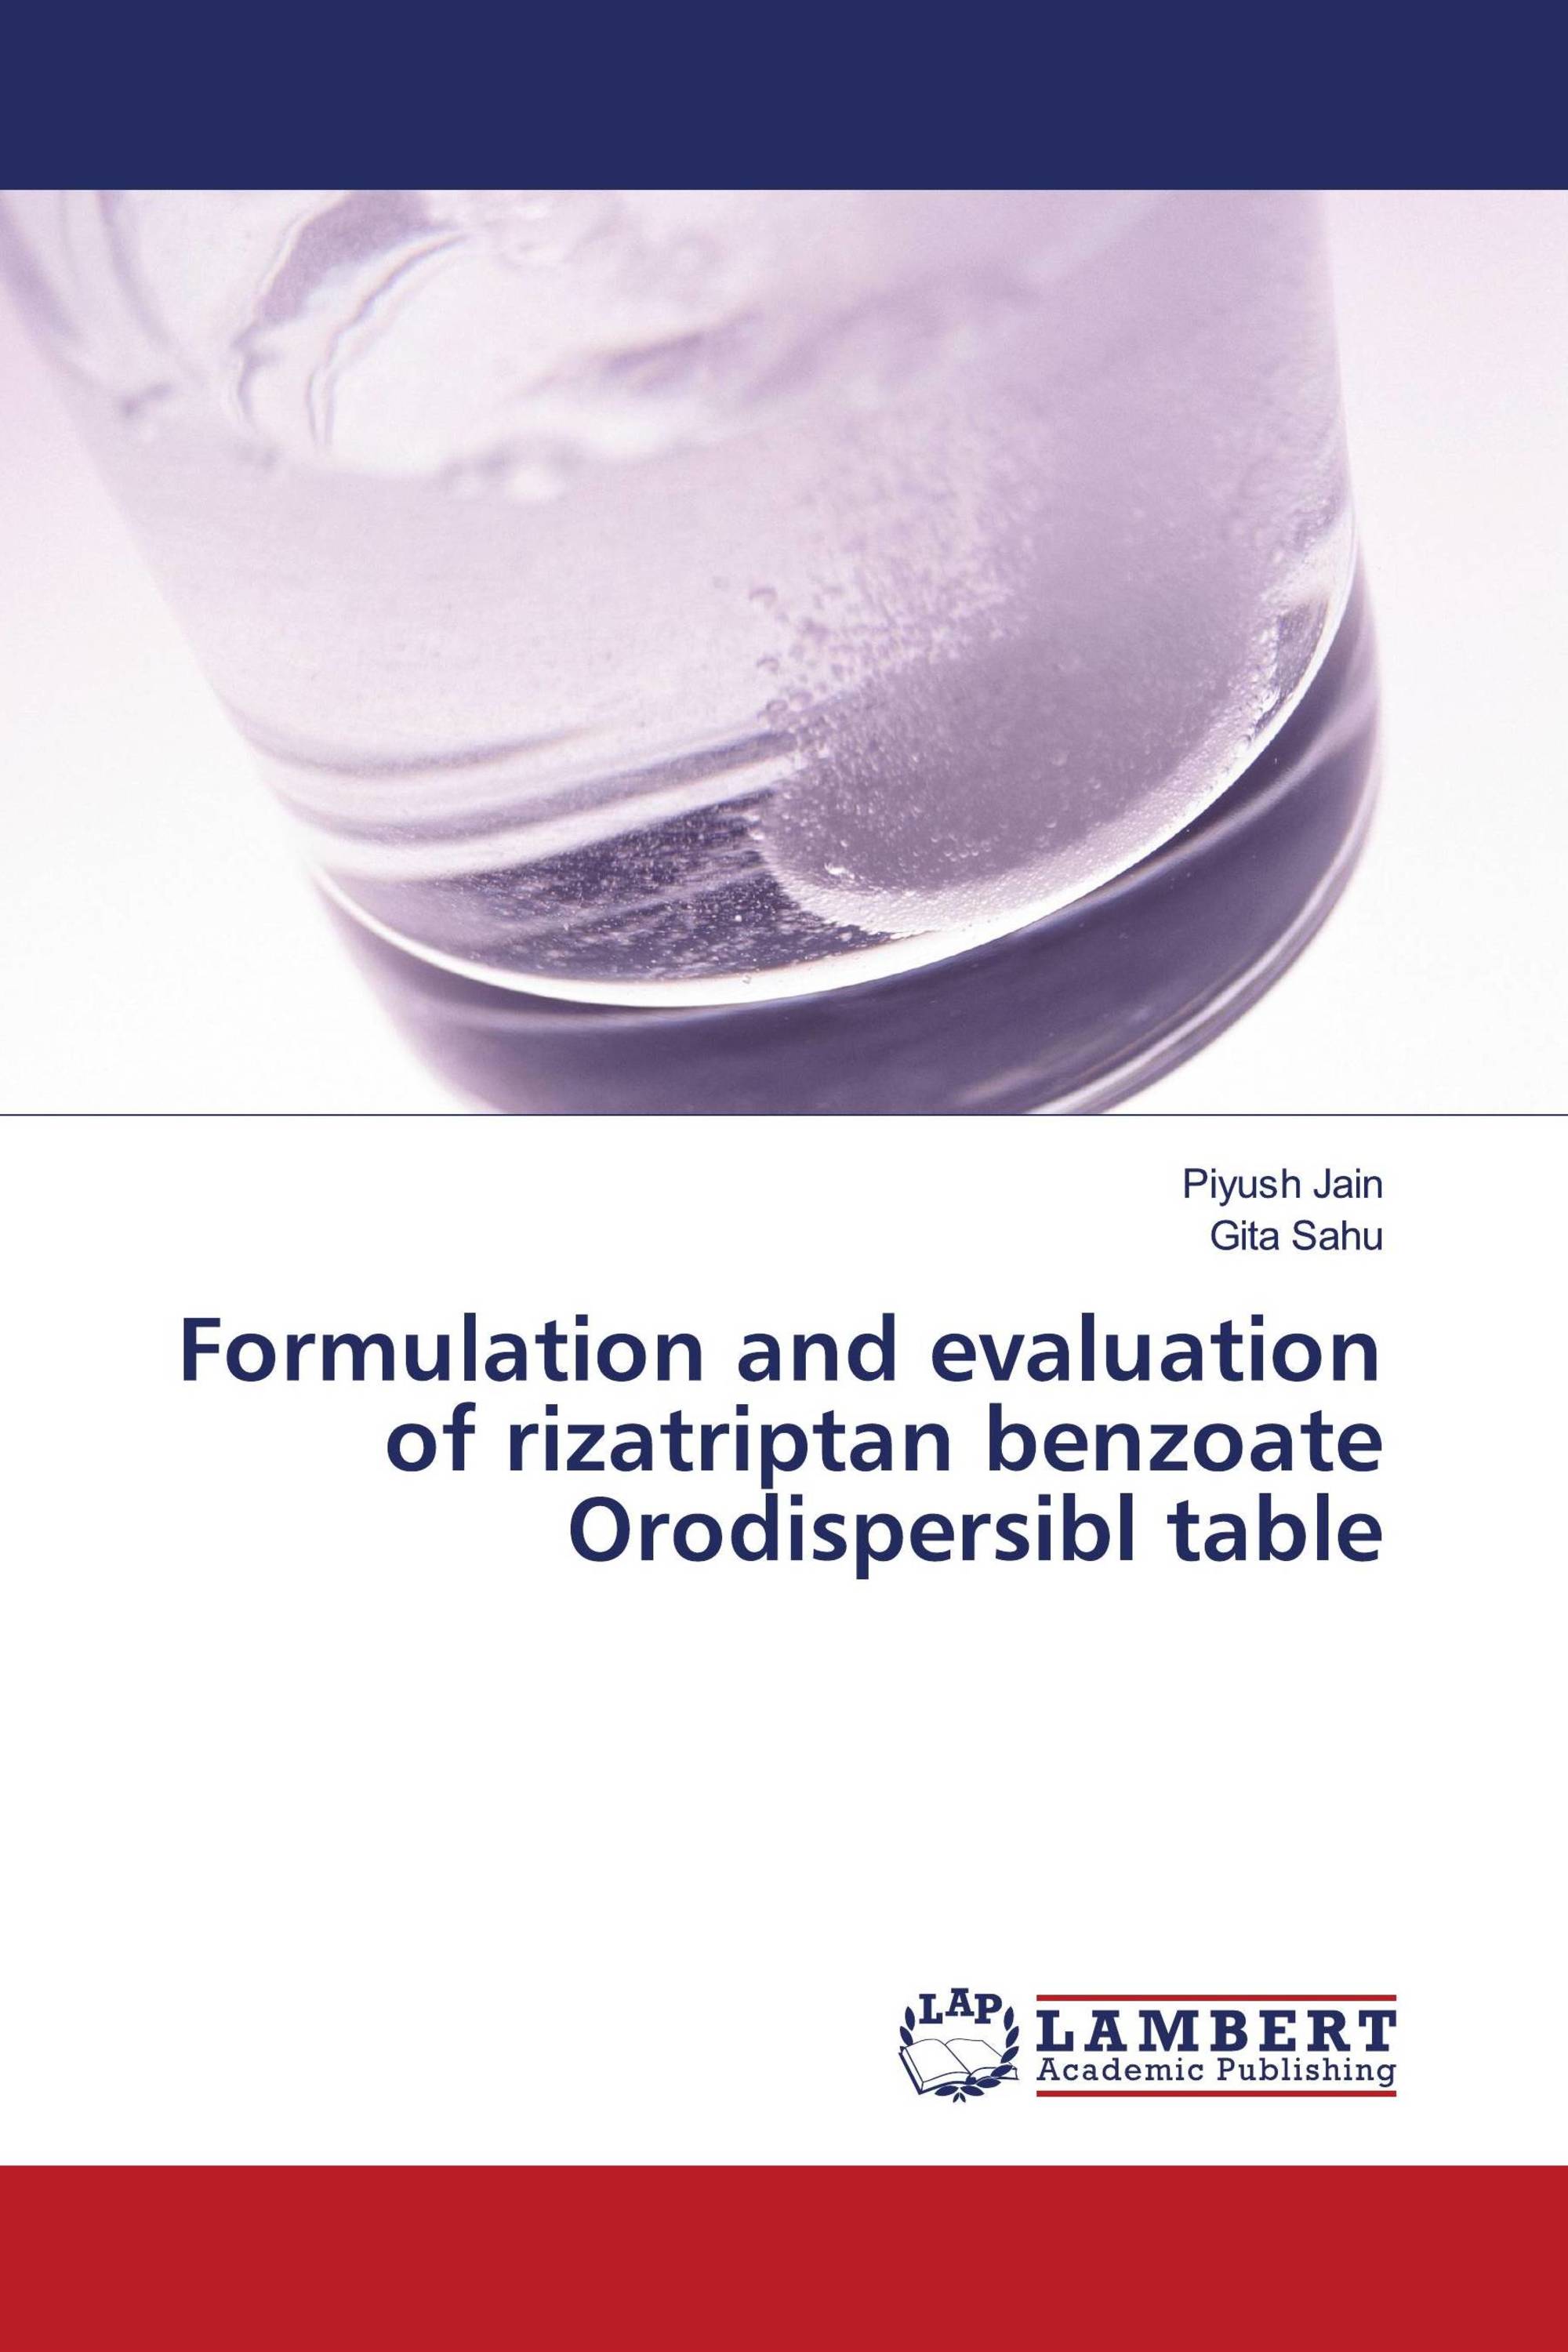 Formulation and evaluation of rizatriptan benzoate Orodispersibl table